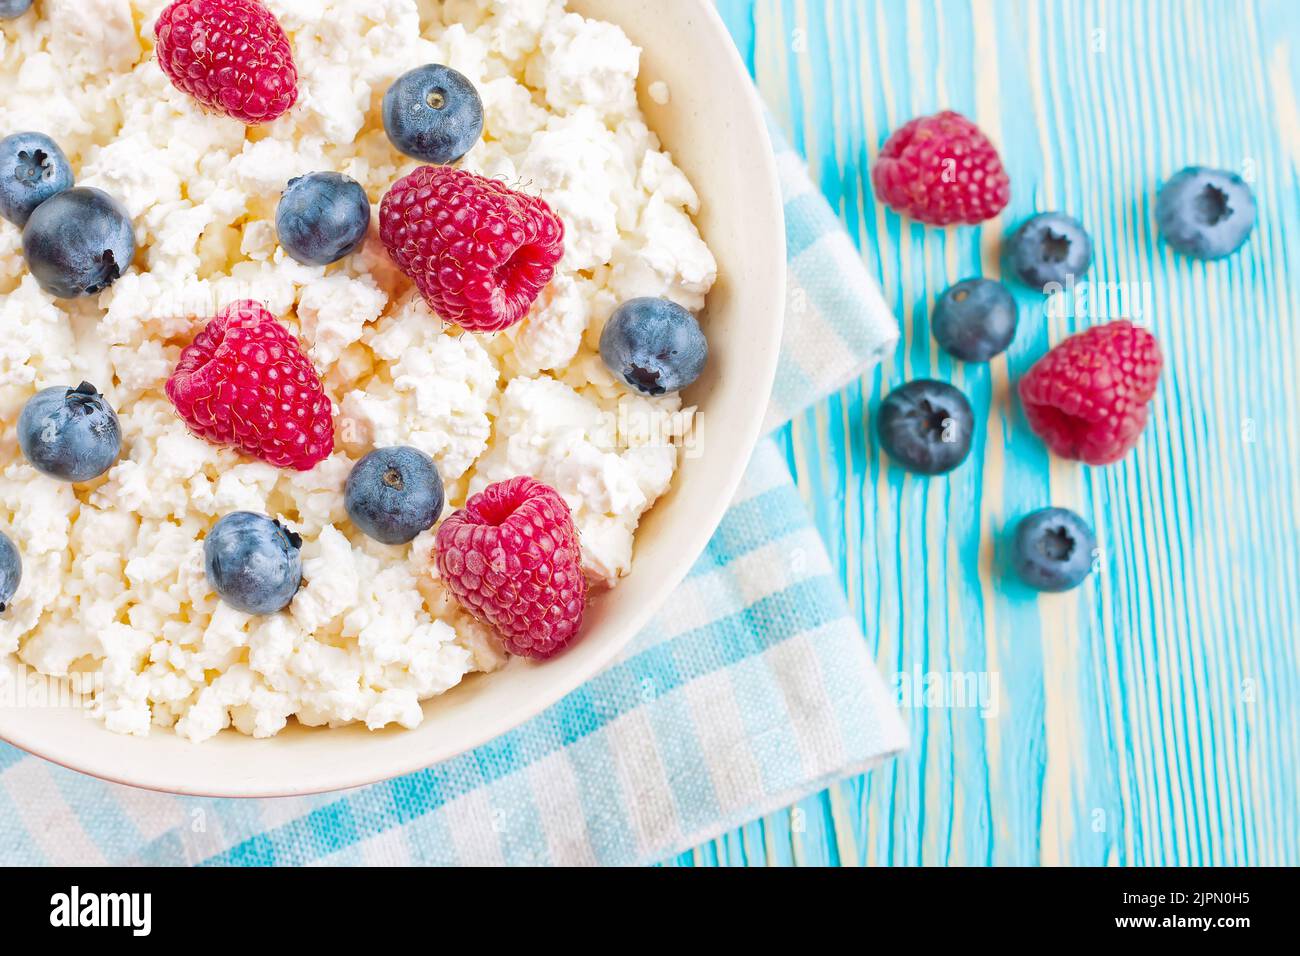 cottage cheese with raspberries and blueberries in bowl on blue wooden background. Dairy products, healthy food. Stock Photo